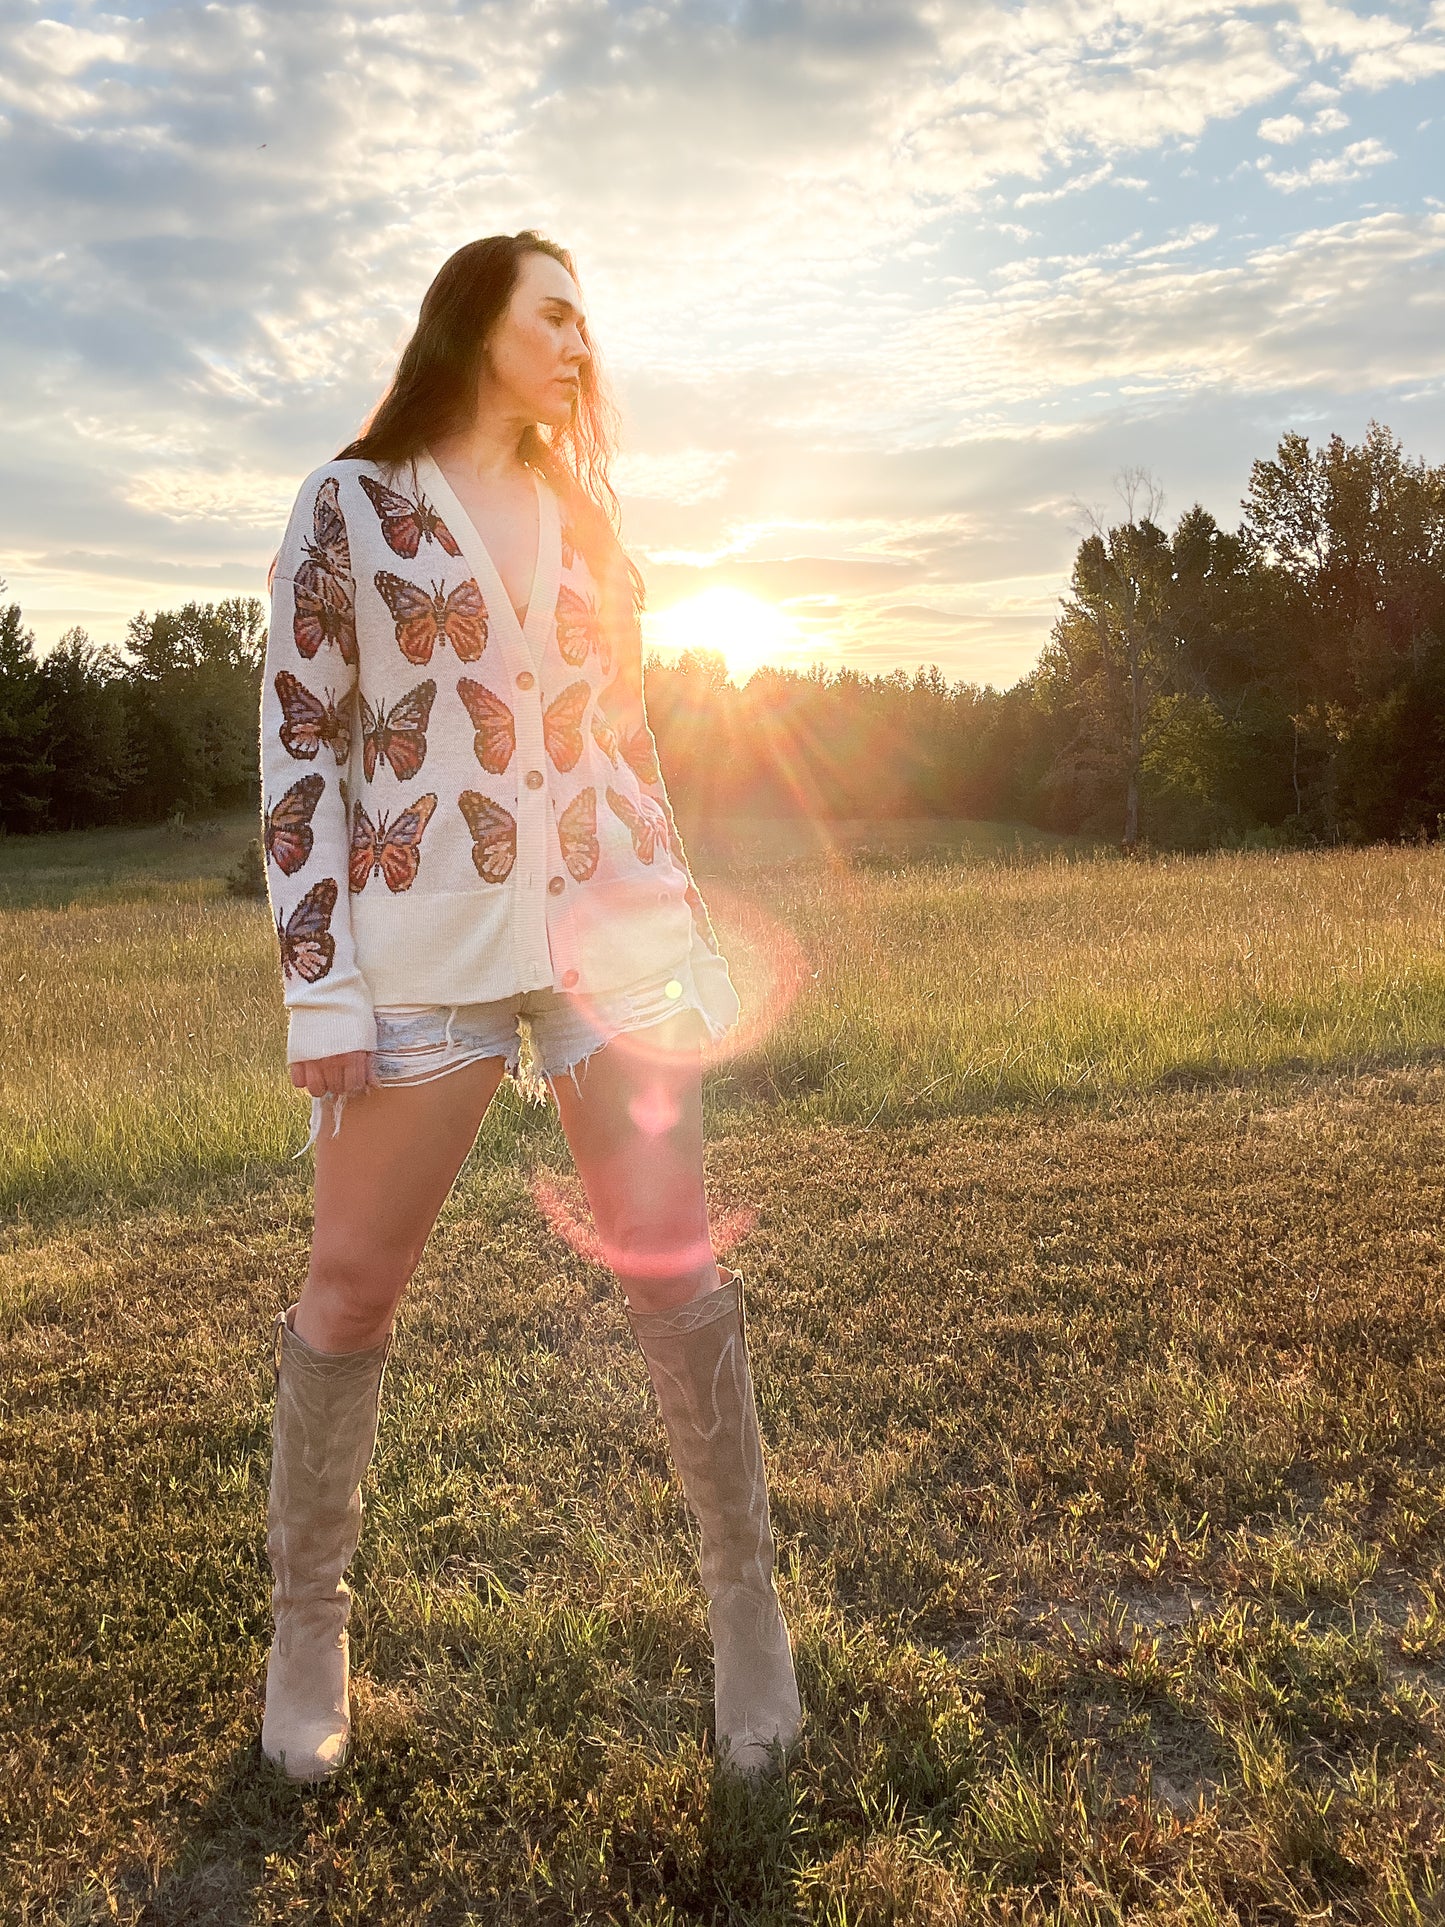 Merino Wool Cardigan in Milky White with butterflies in shades of red, blue, tangerine, and black.  Made in family owned factory in Italy. Worn with denim cutoff shorts and cowboy boots.